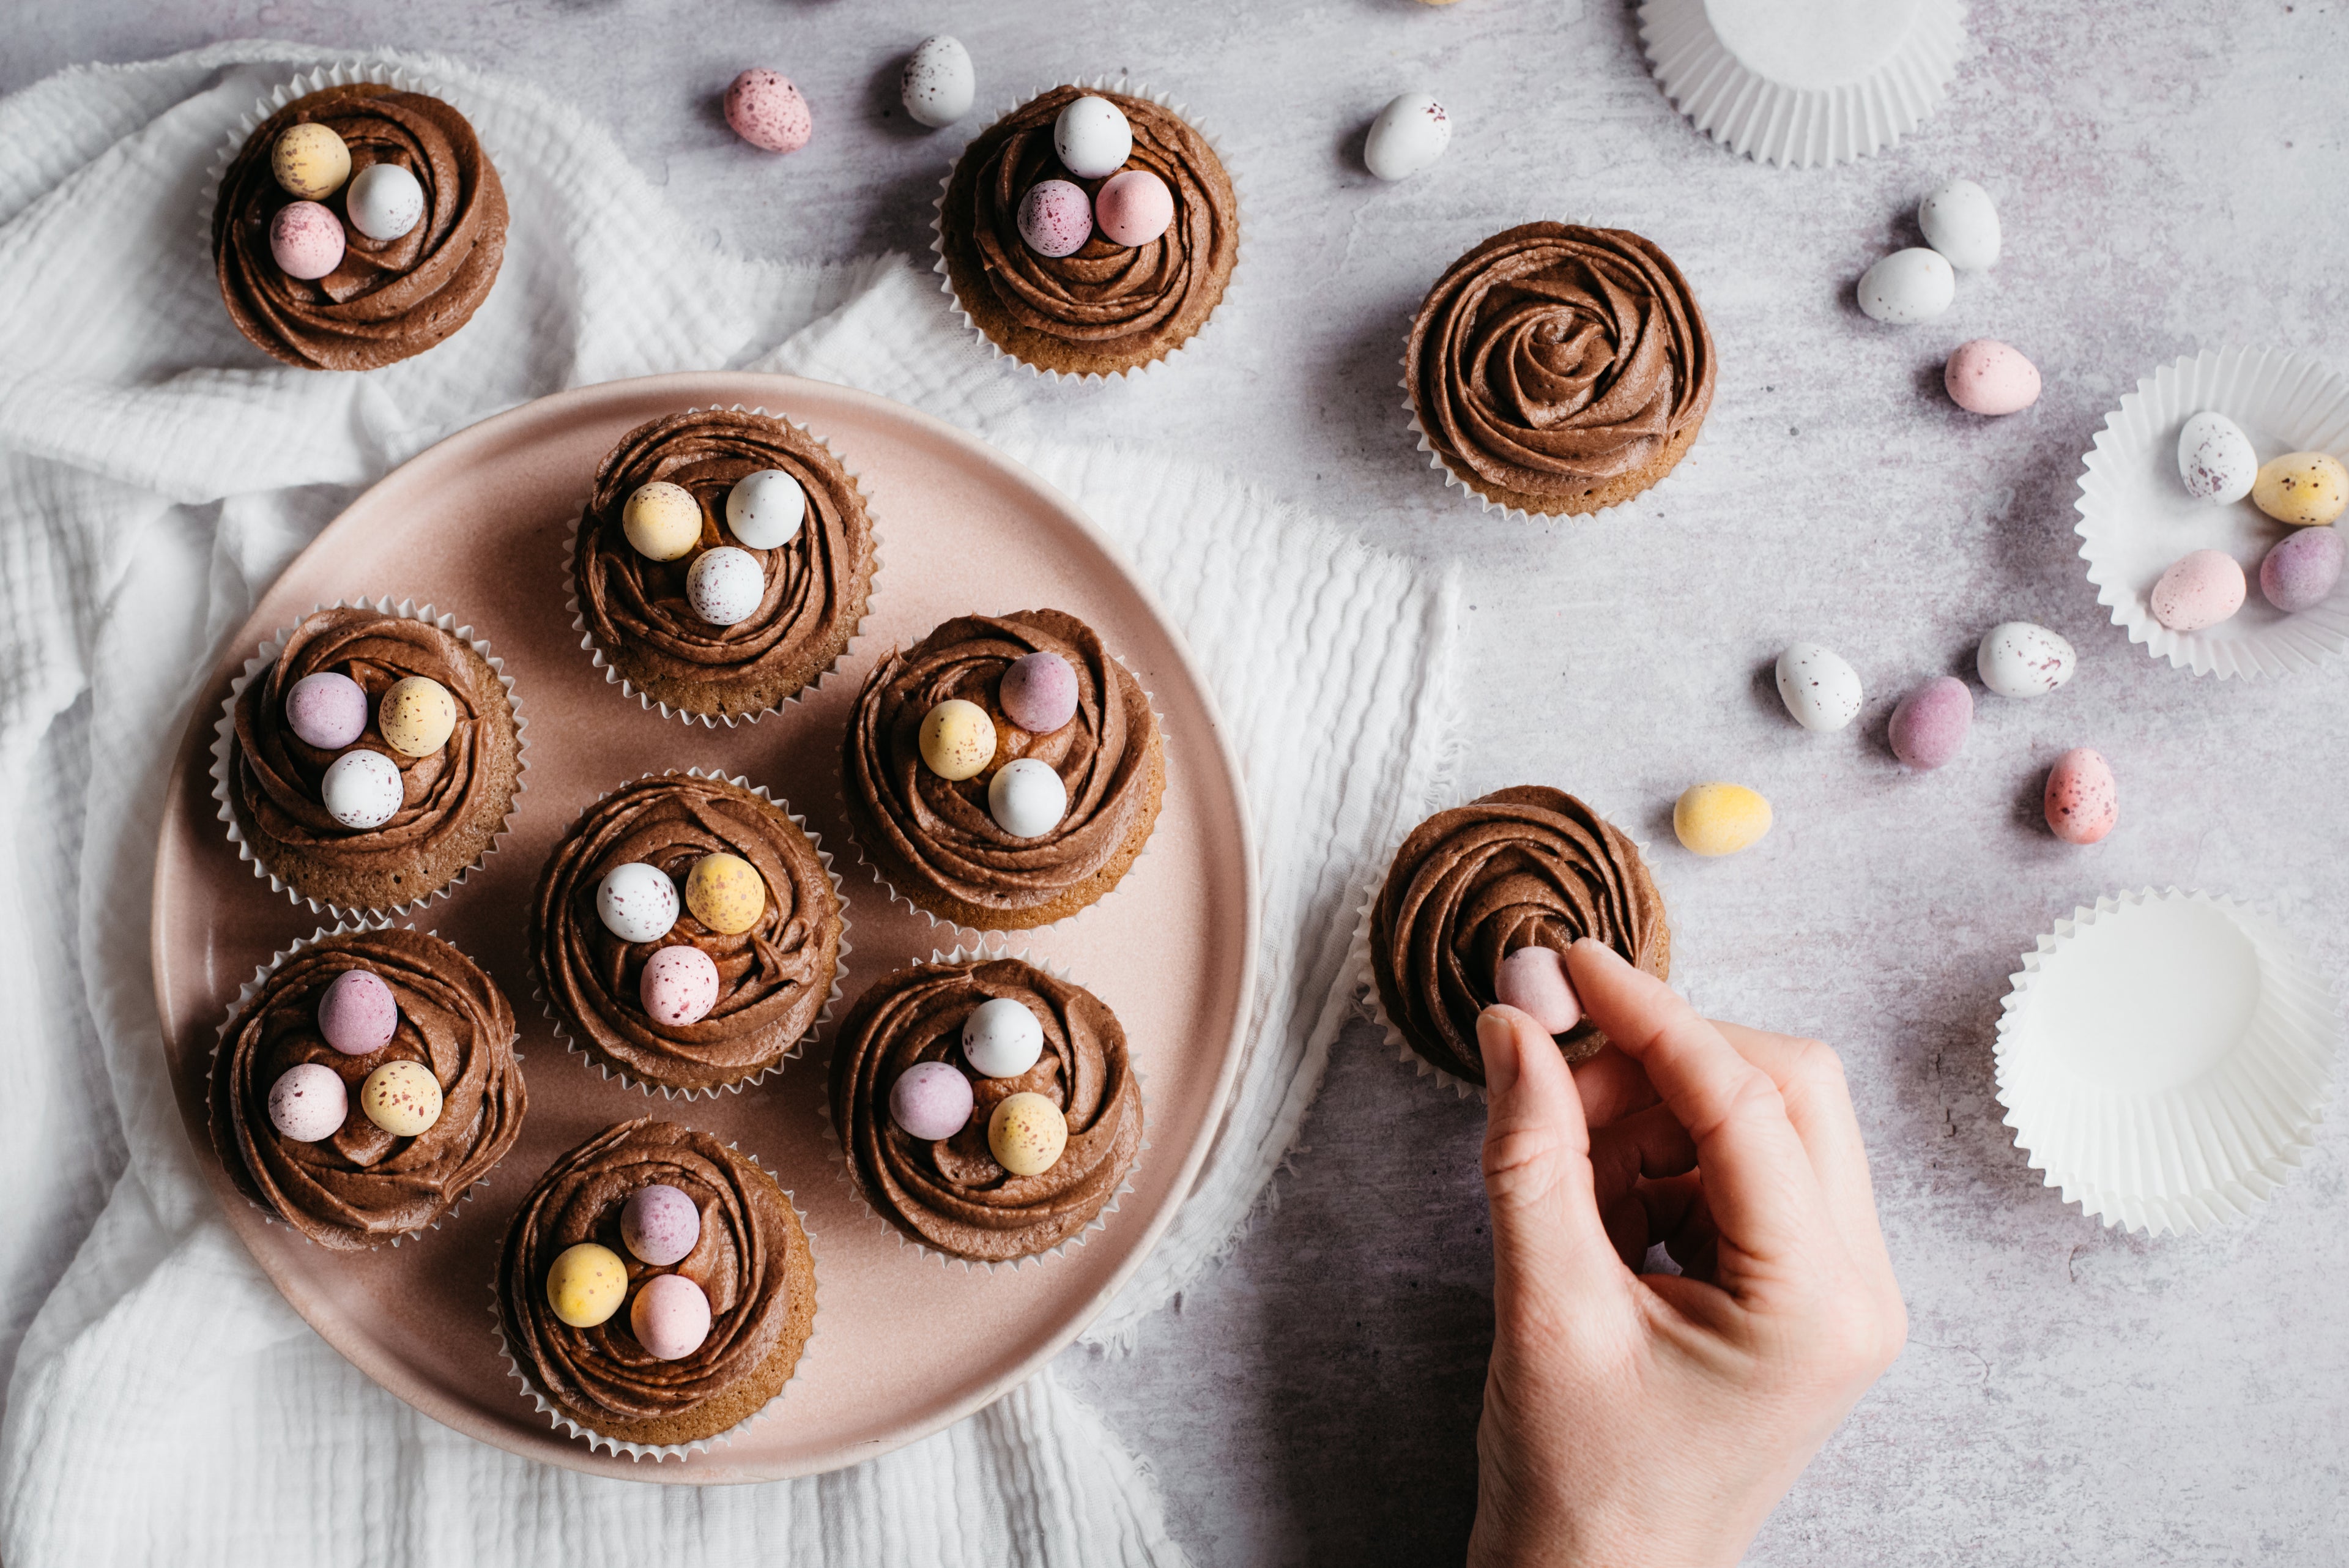 birds-eye view of cupcakes topped with chocolate icing and mini eggs